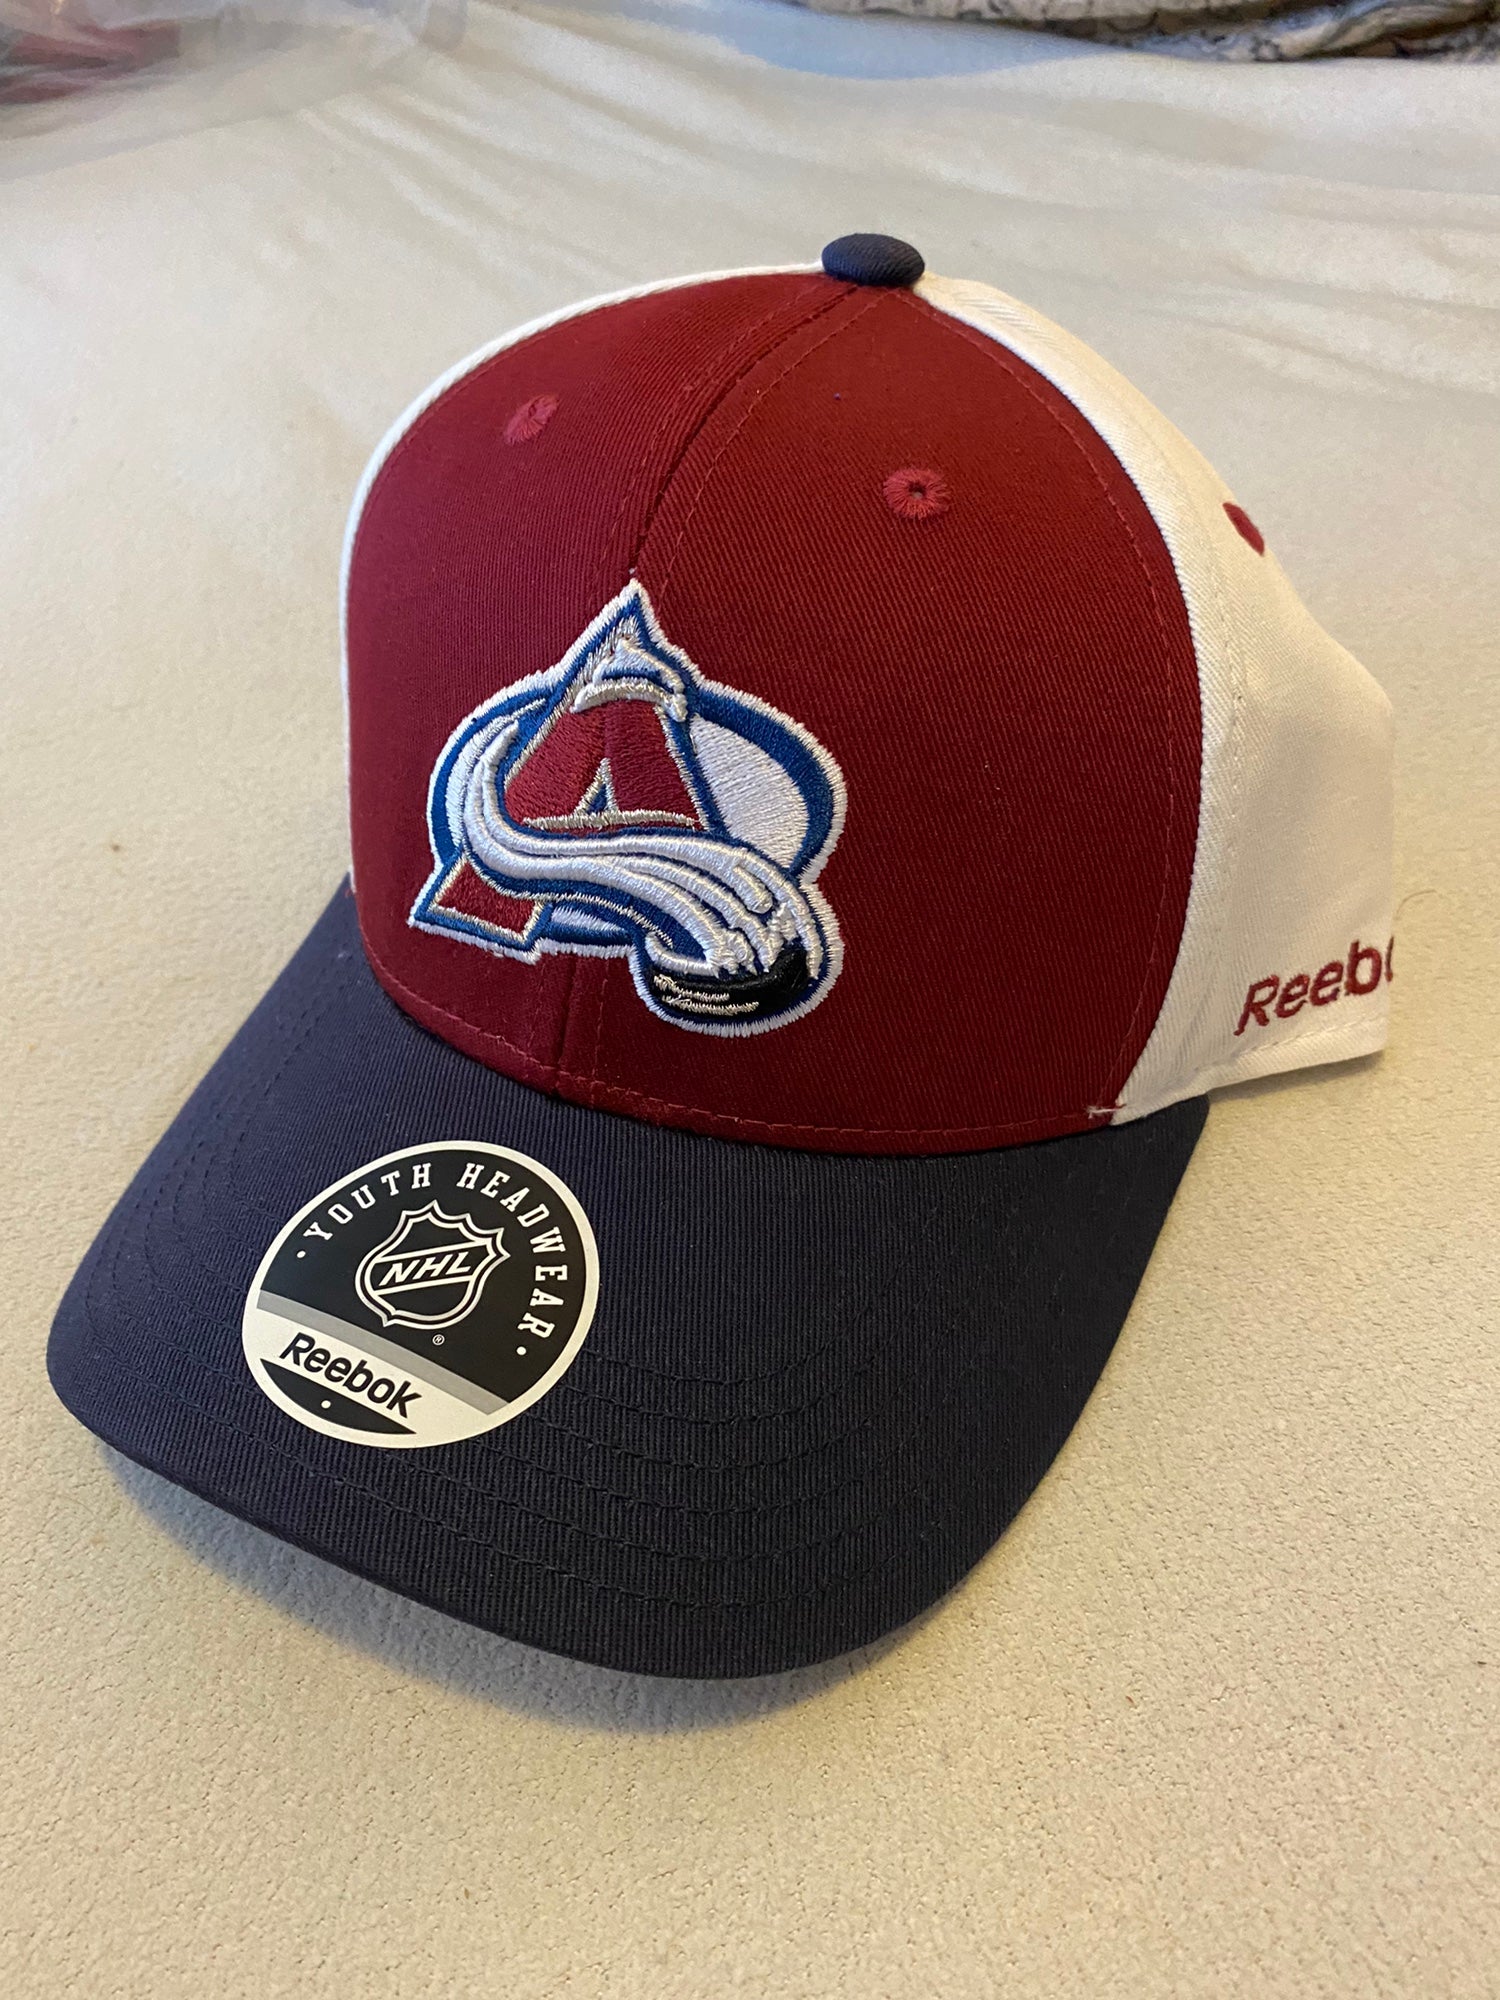 Colorado Avalanche on X: Our 2018 #NHLDraft hats are on sale at